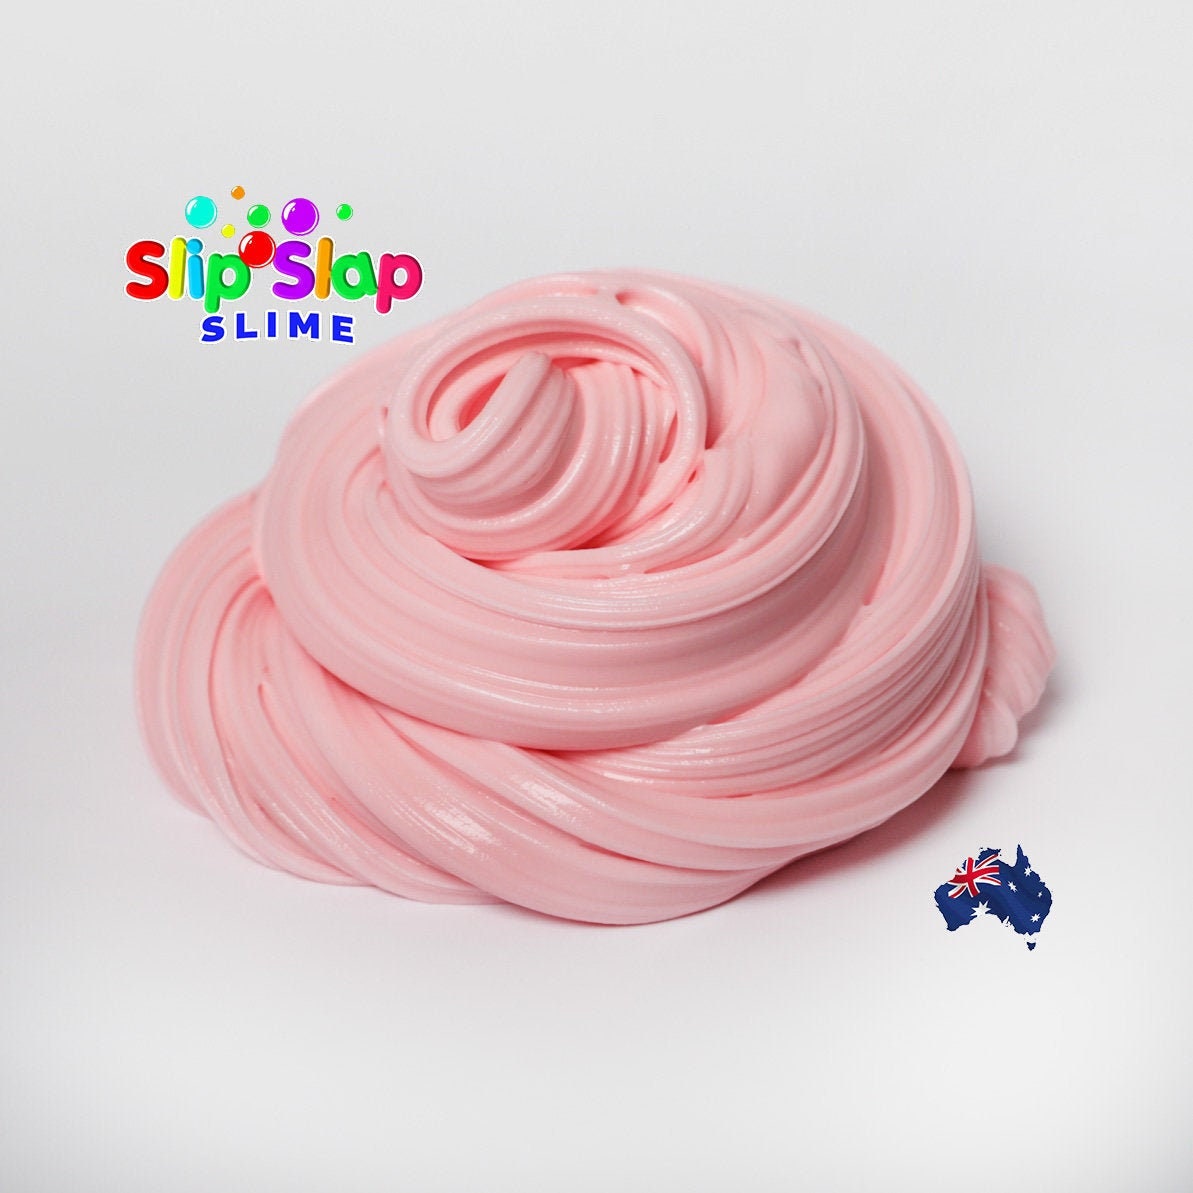 Sw33t s0ph13 pink slime jelly gunged